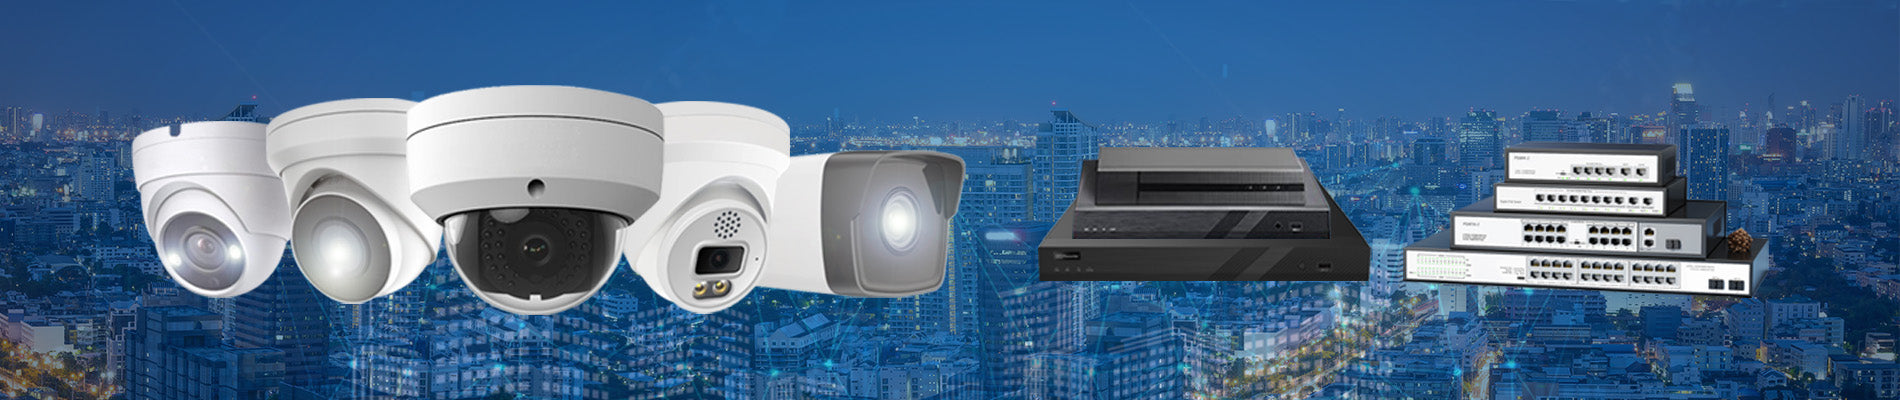 Security System Online Store-CCTV Supply Inc